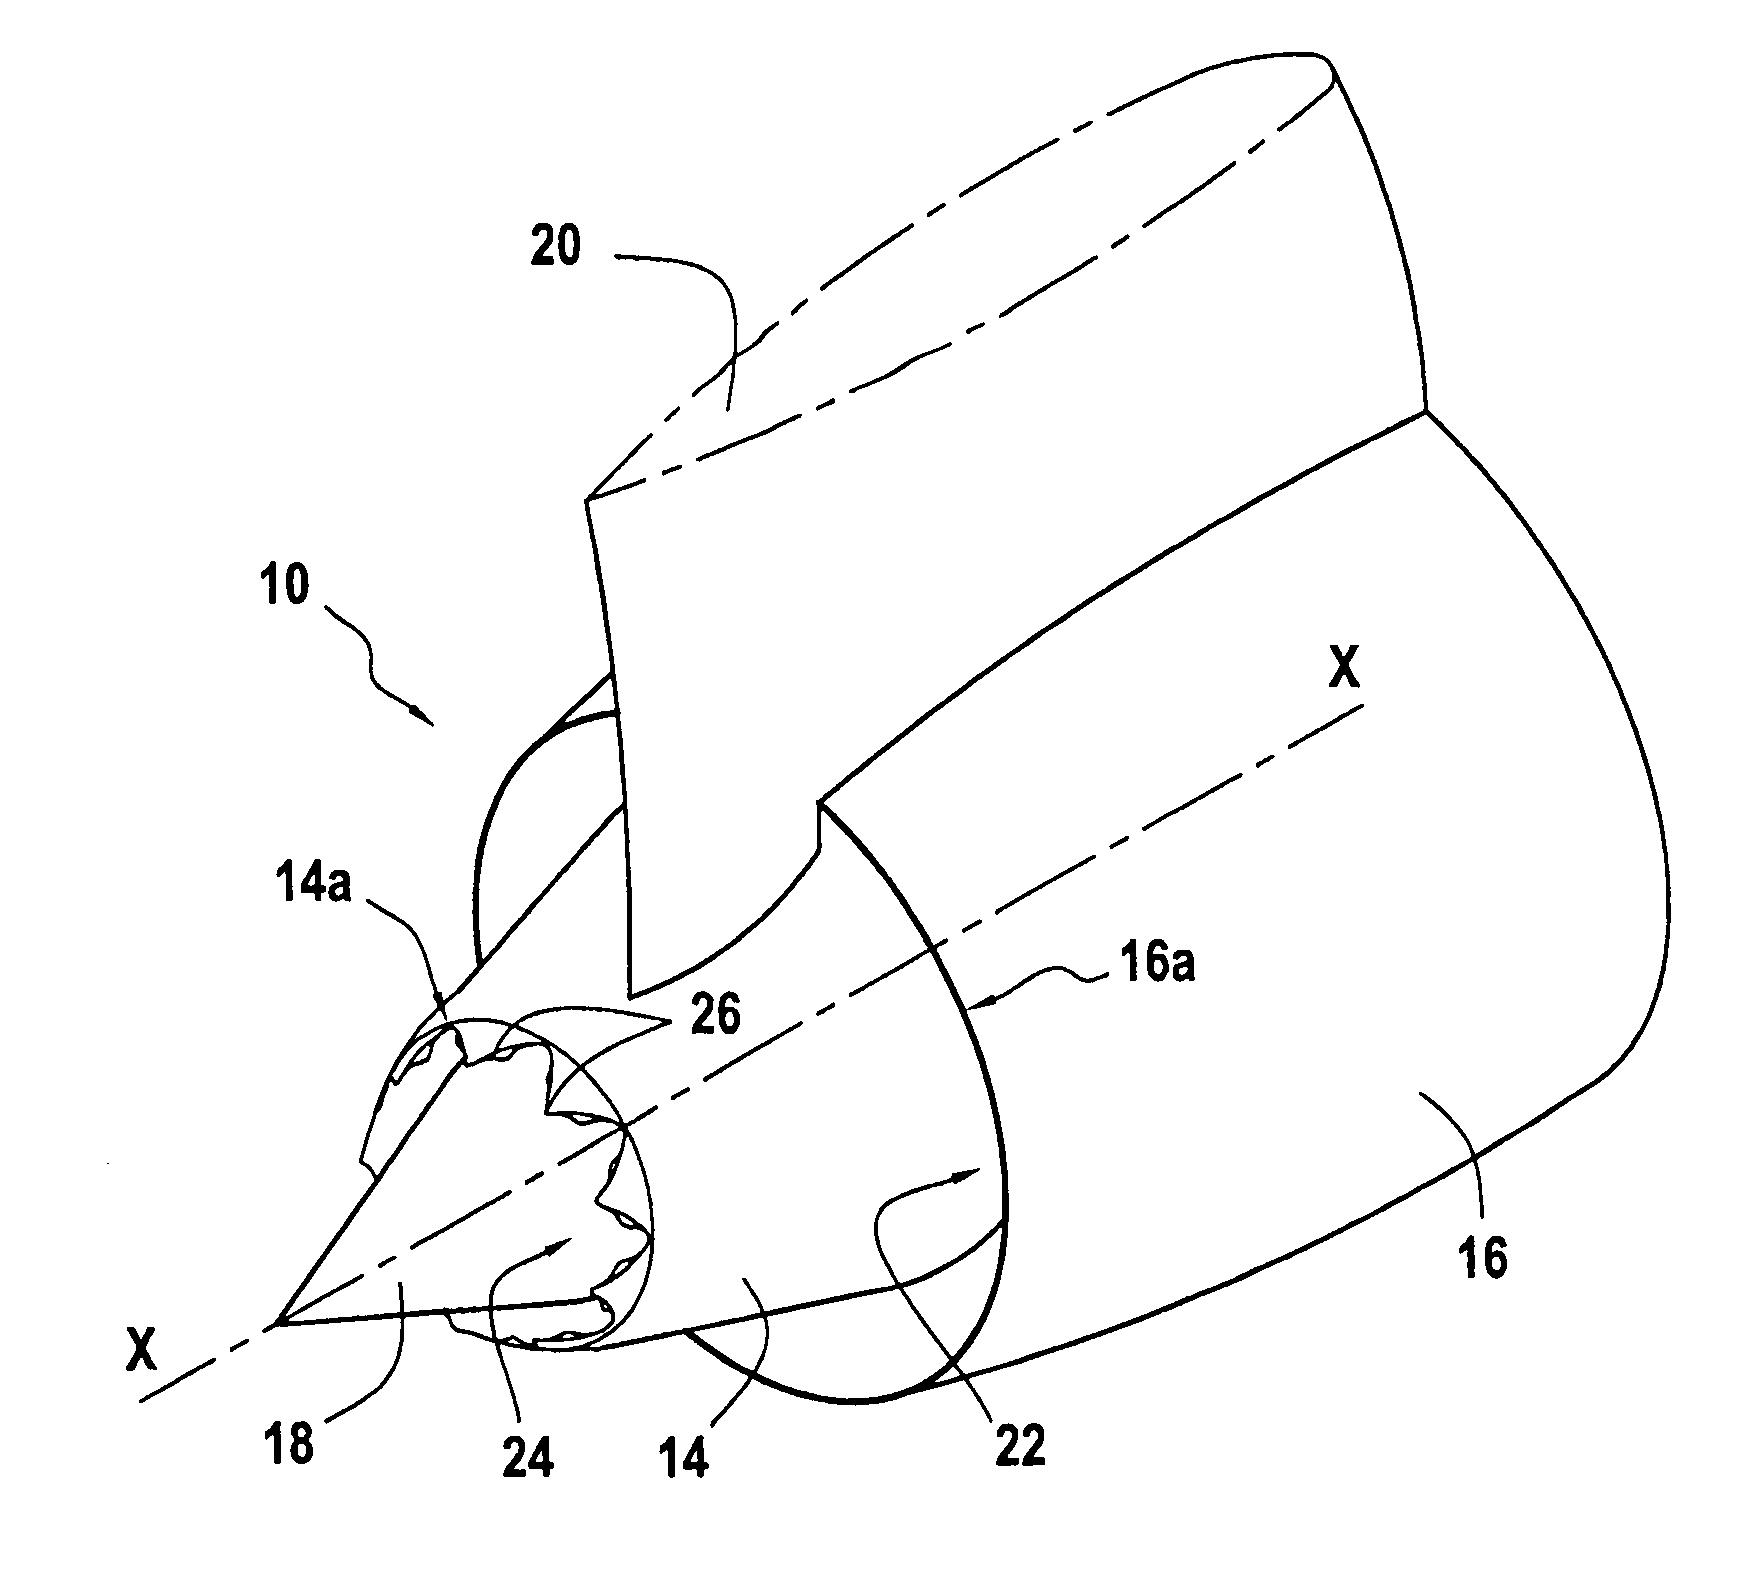 Turbomachine nozzle cowl having patterns with lateral fins for reducing jet noise